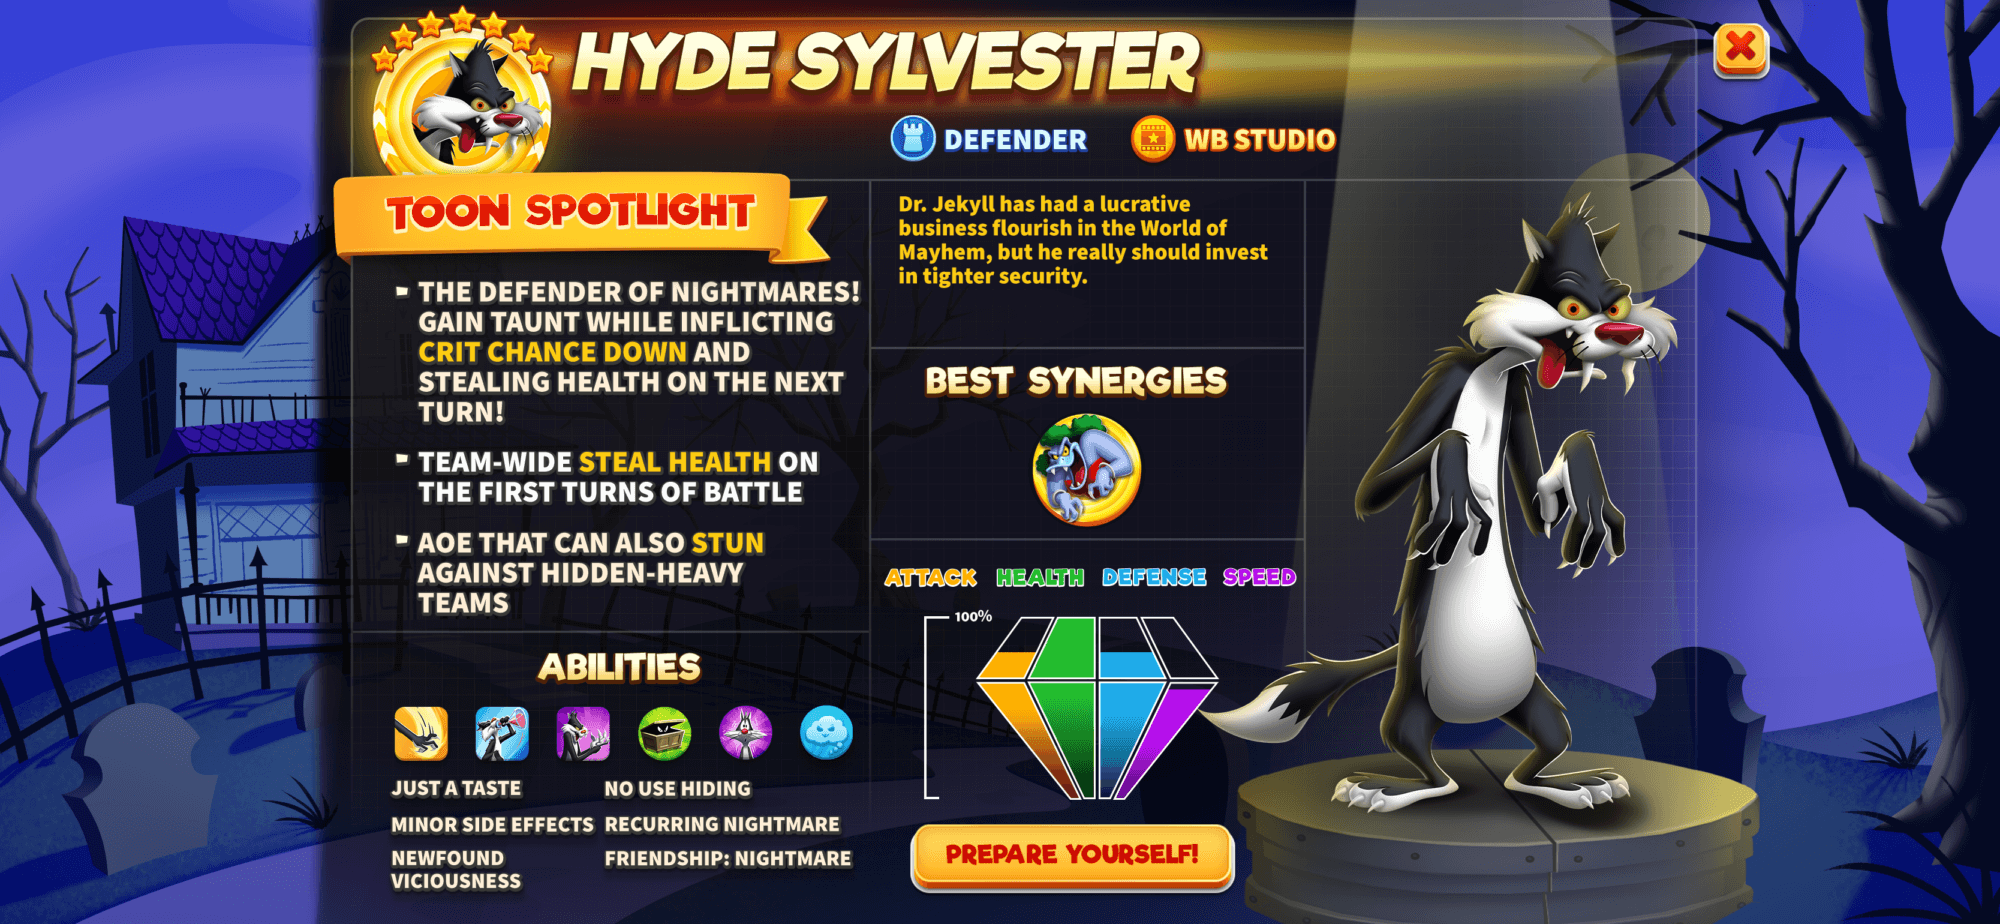 layout_profile_interstitial_hyde_sylvester_2....